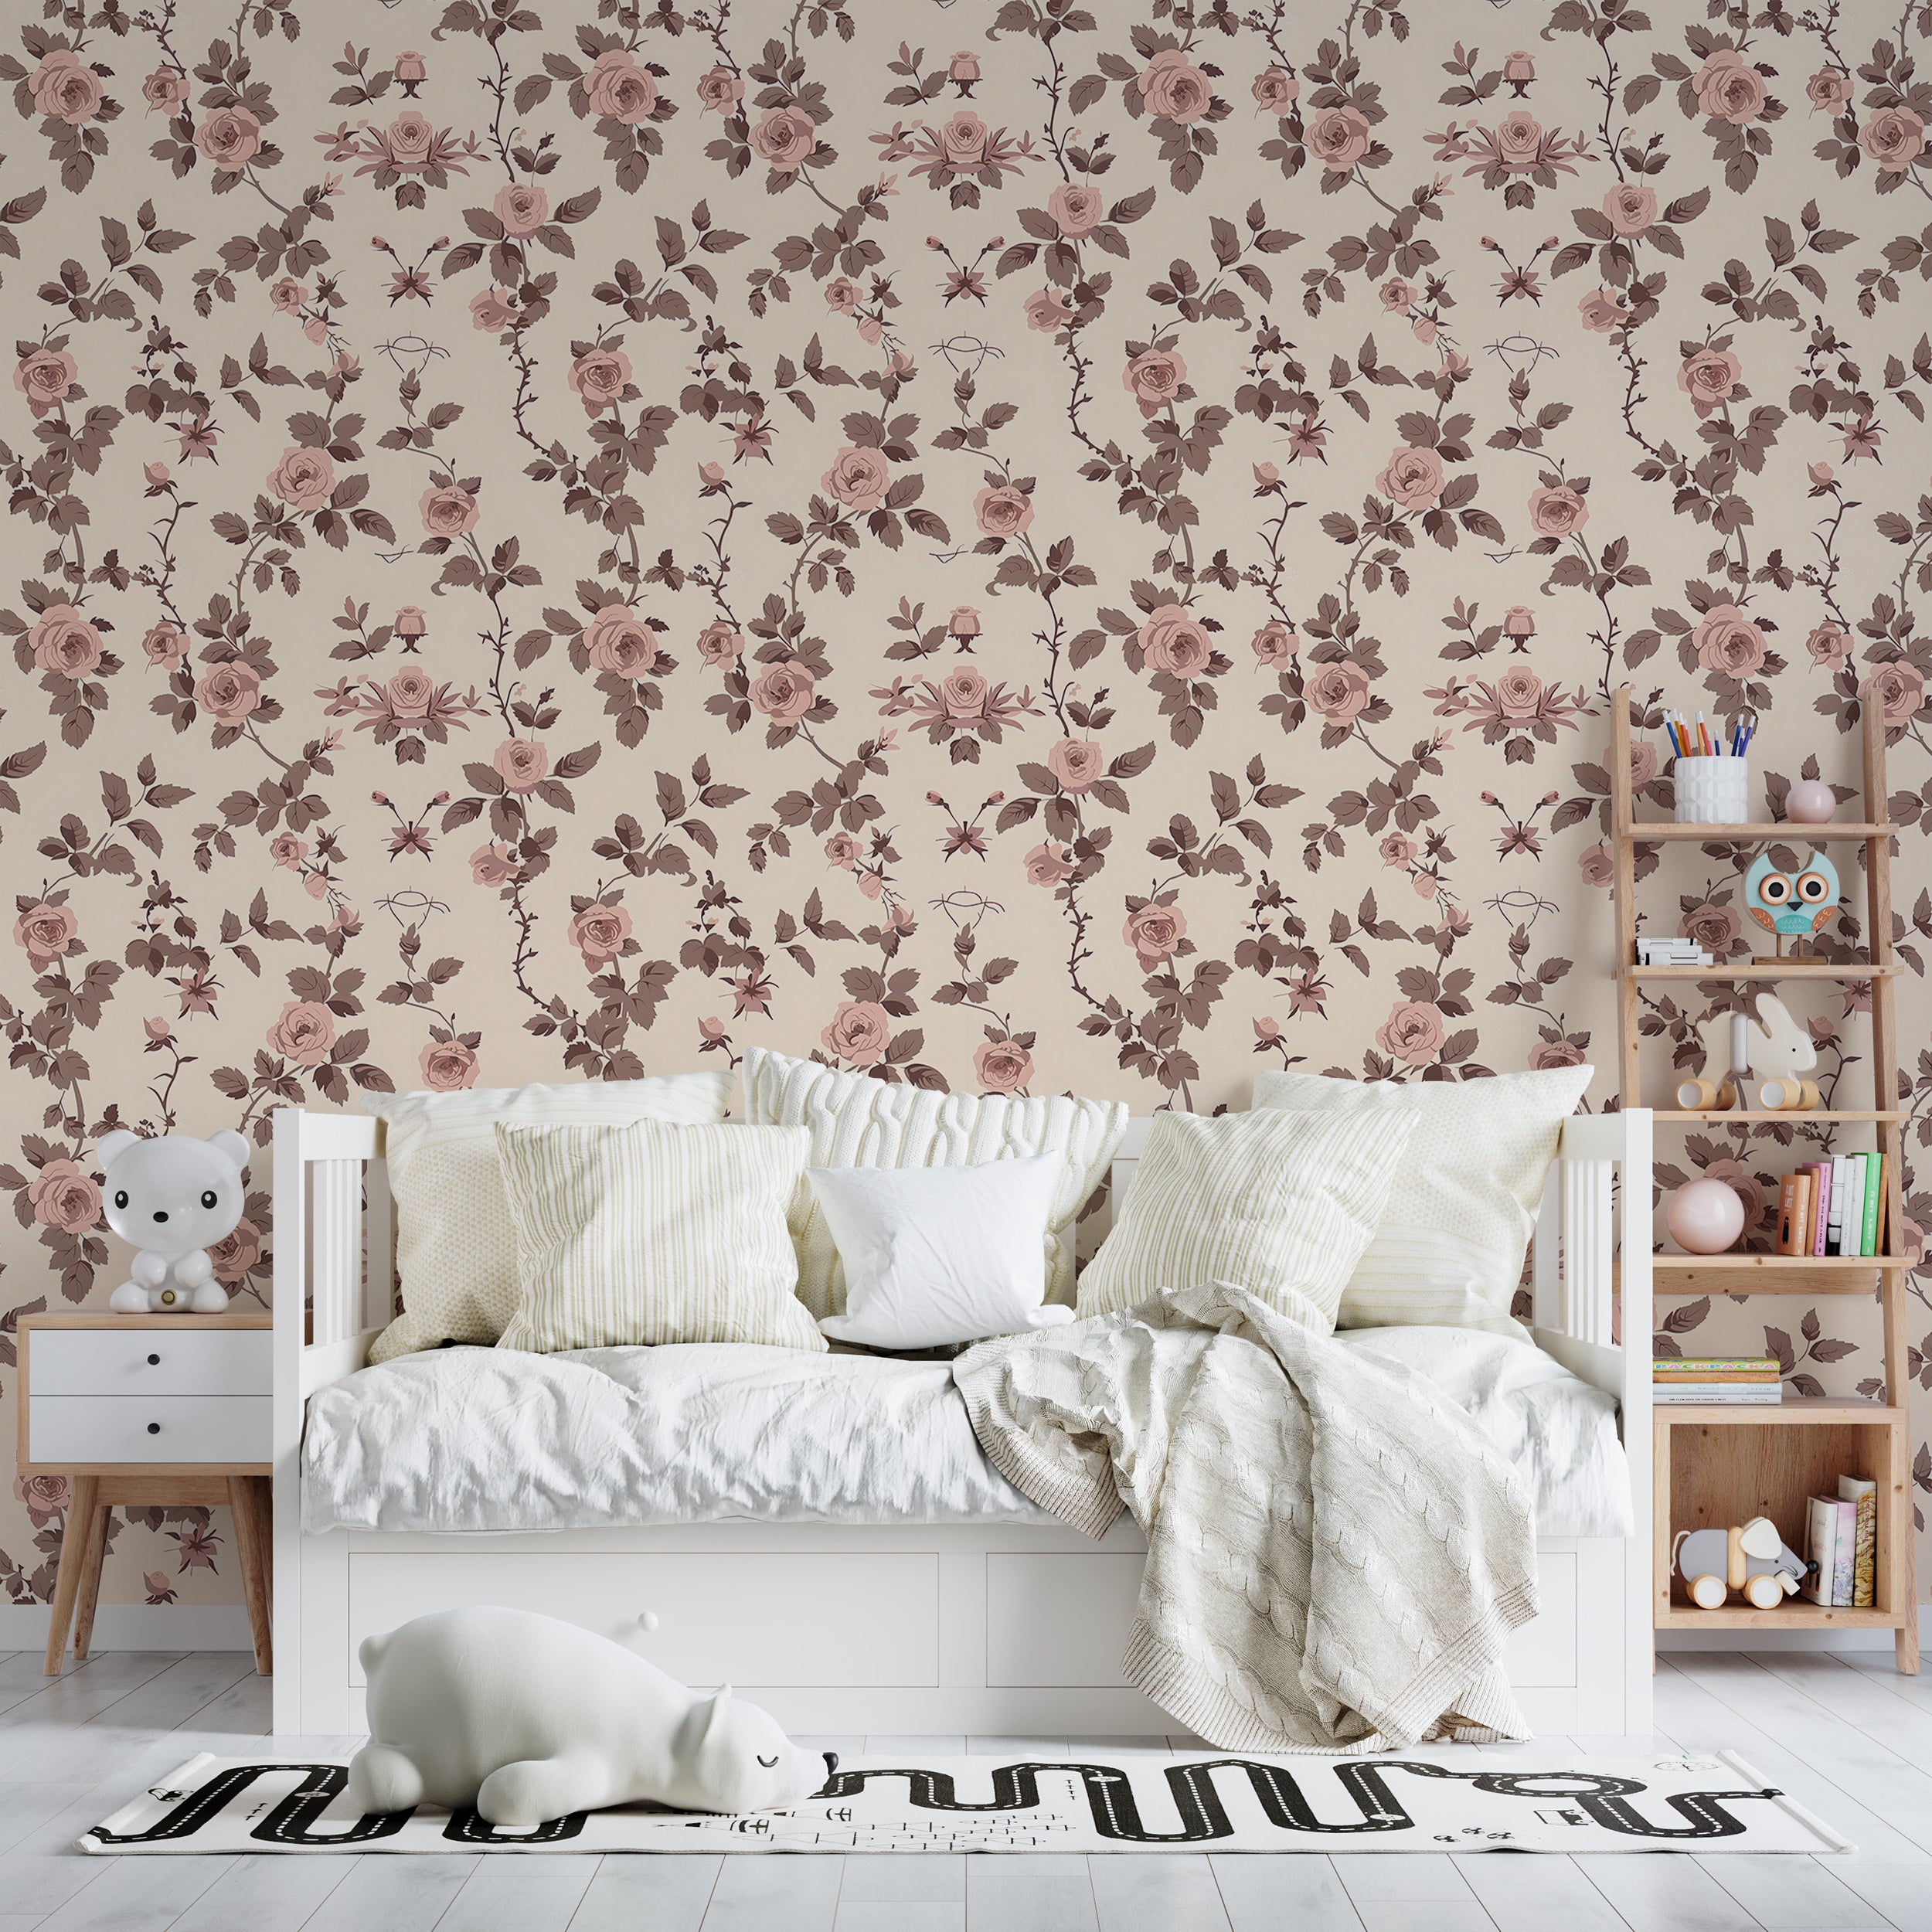 Peel and stick wallpaper featuring charming rose motifs